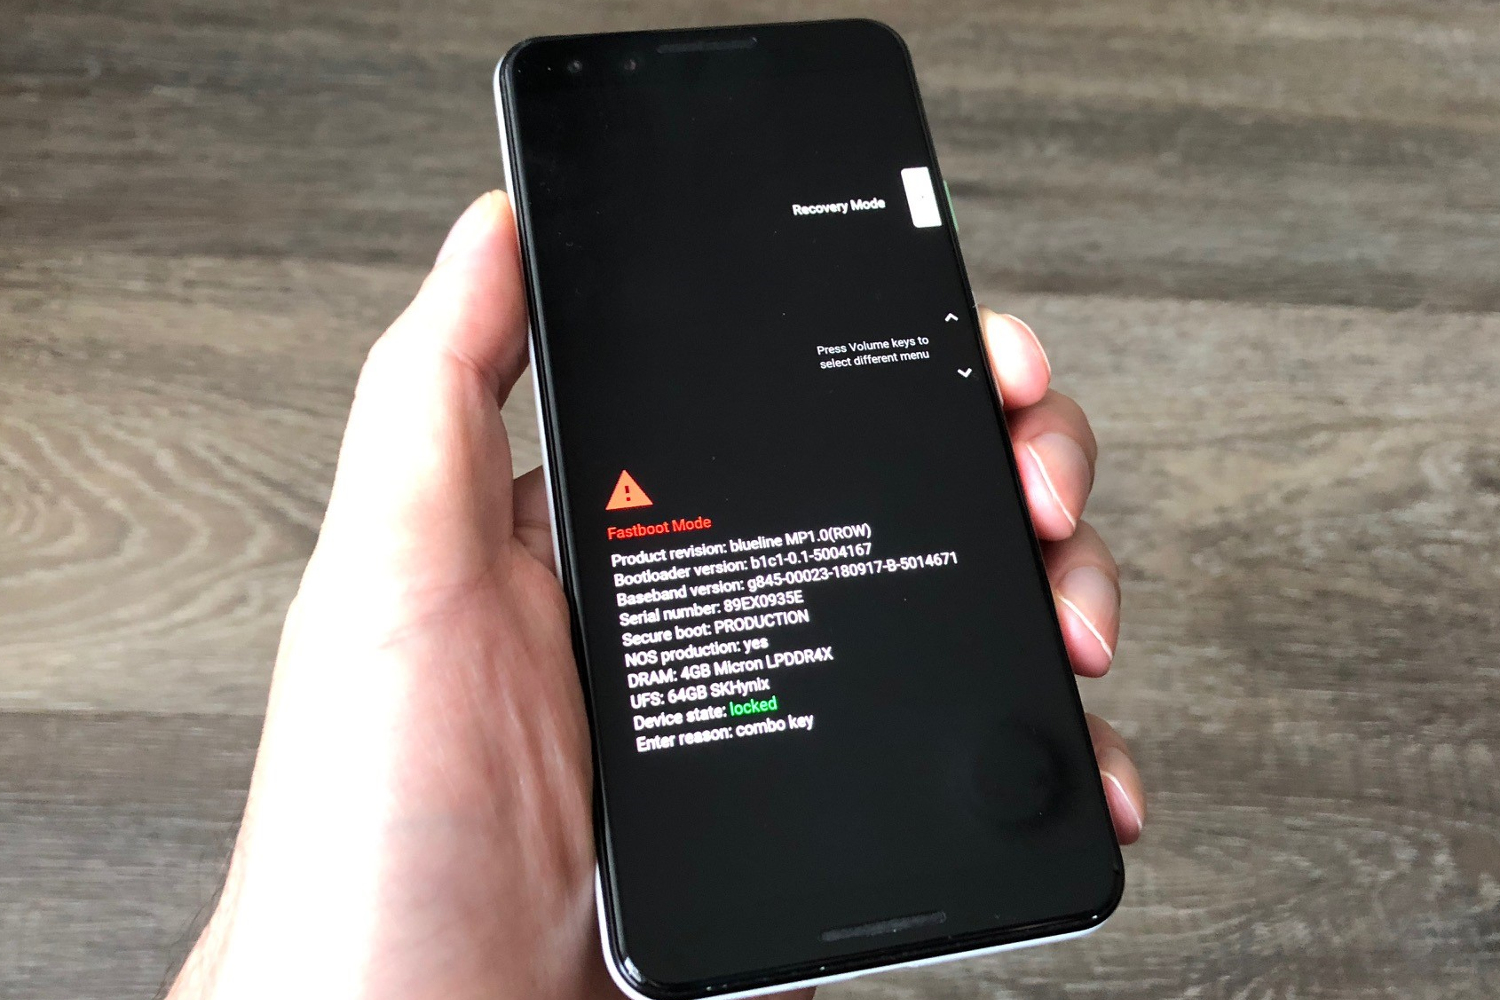 Pixel 3 recovery mode